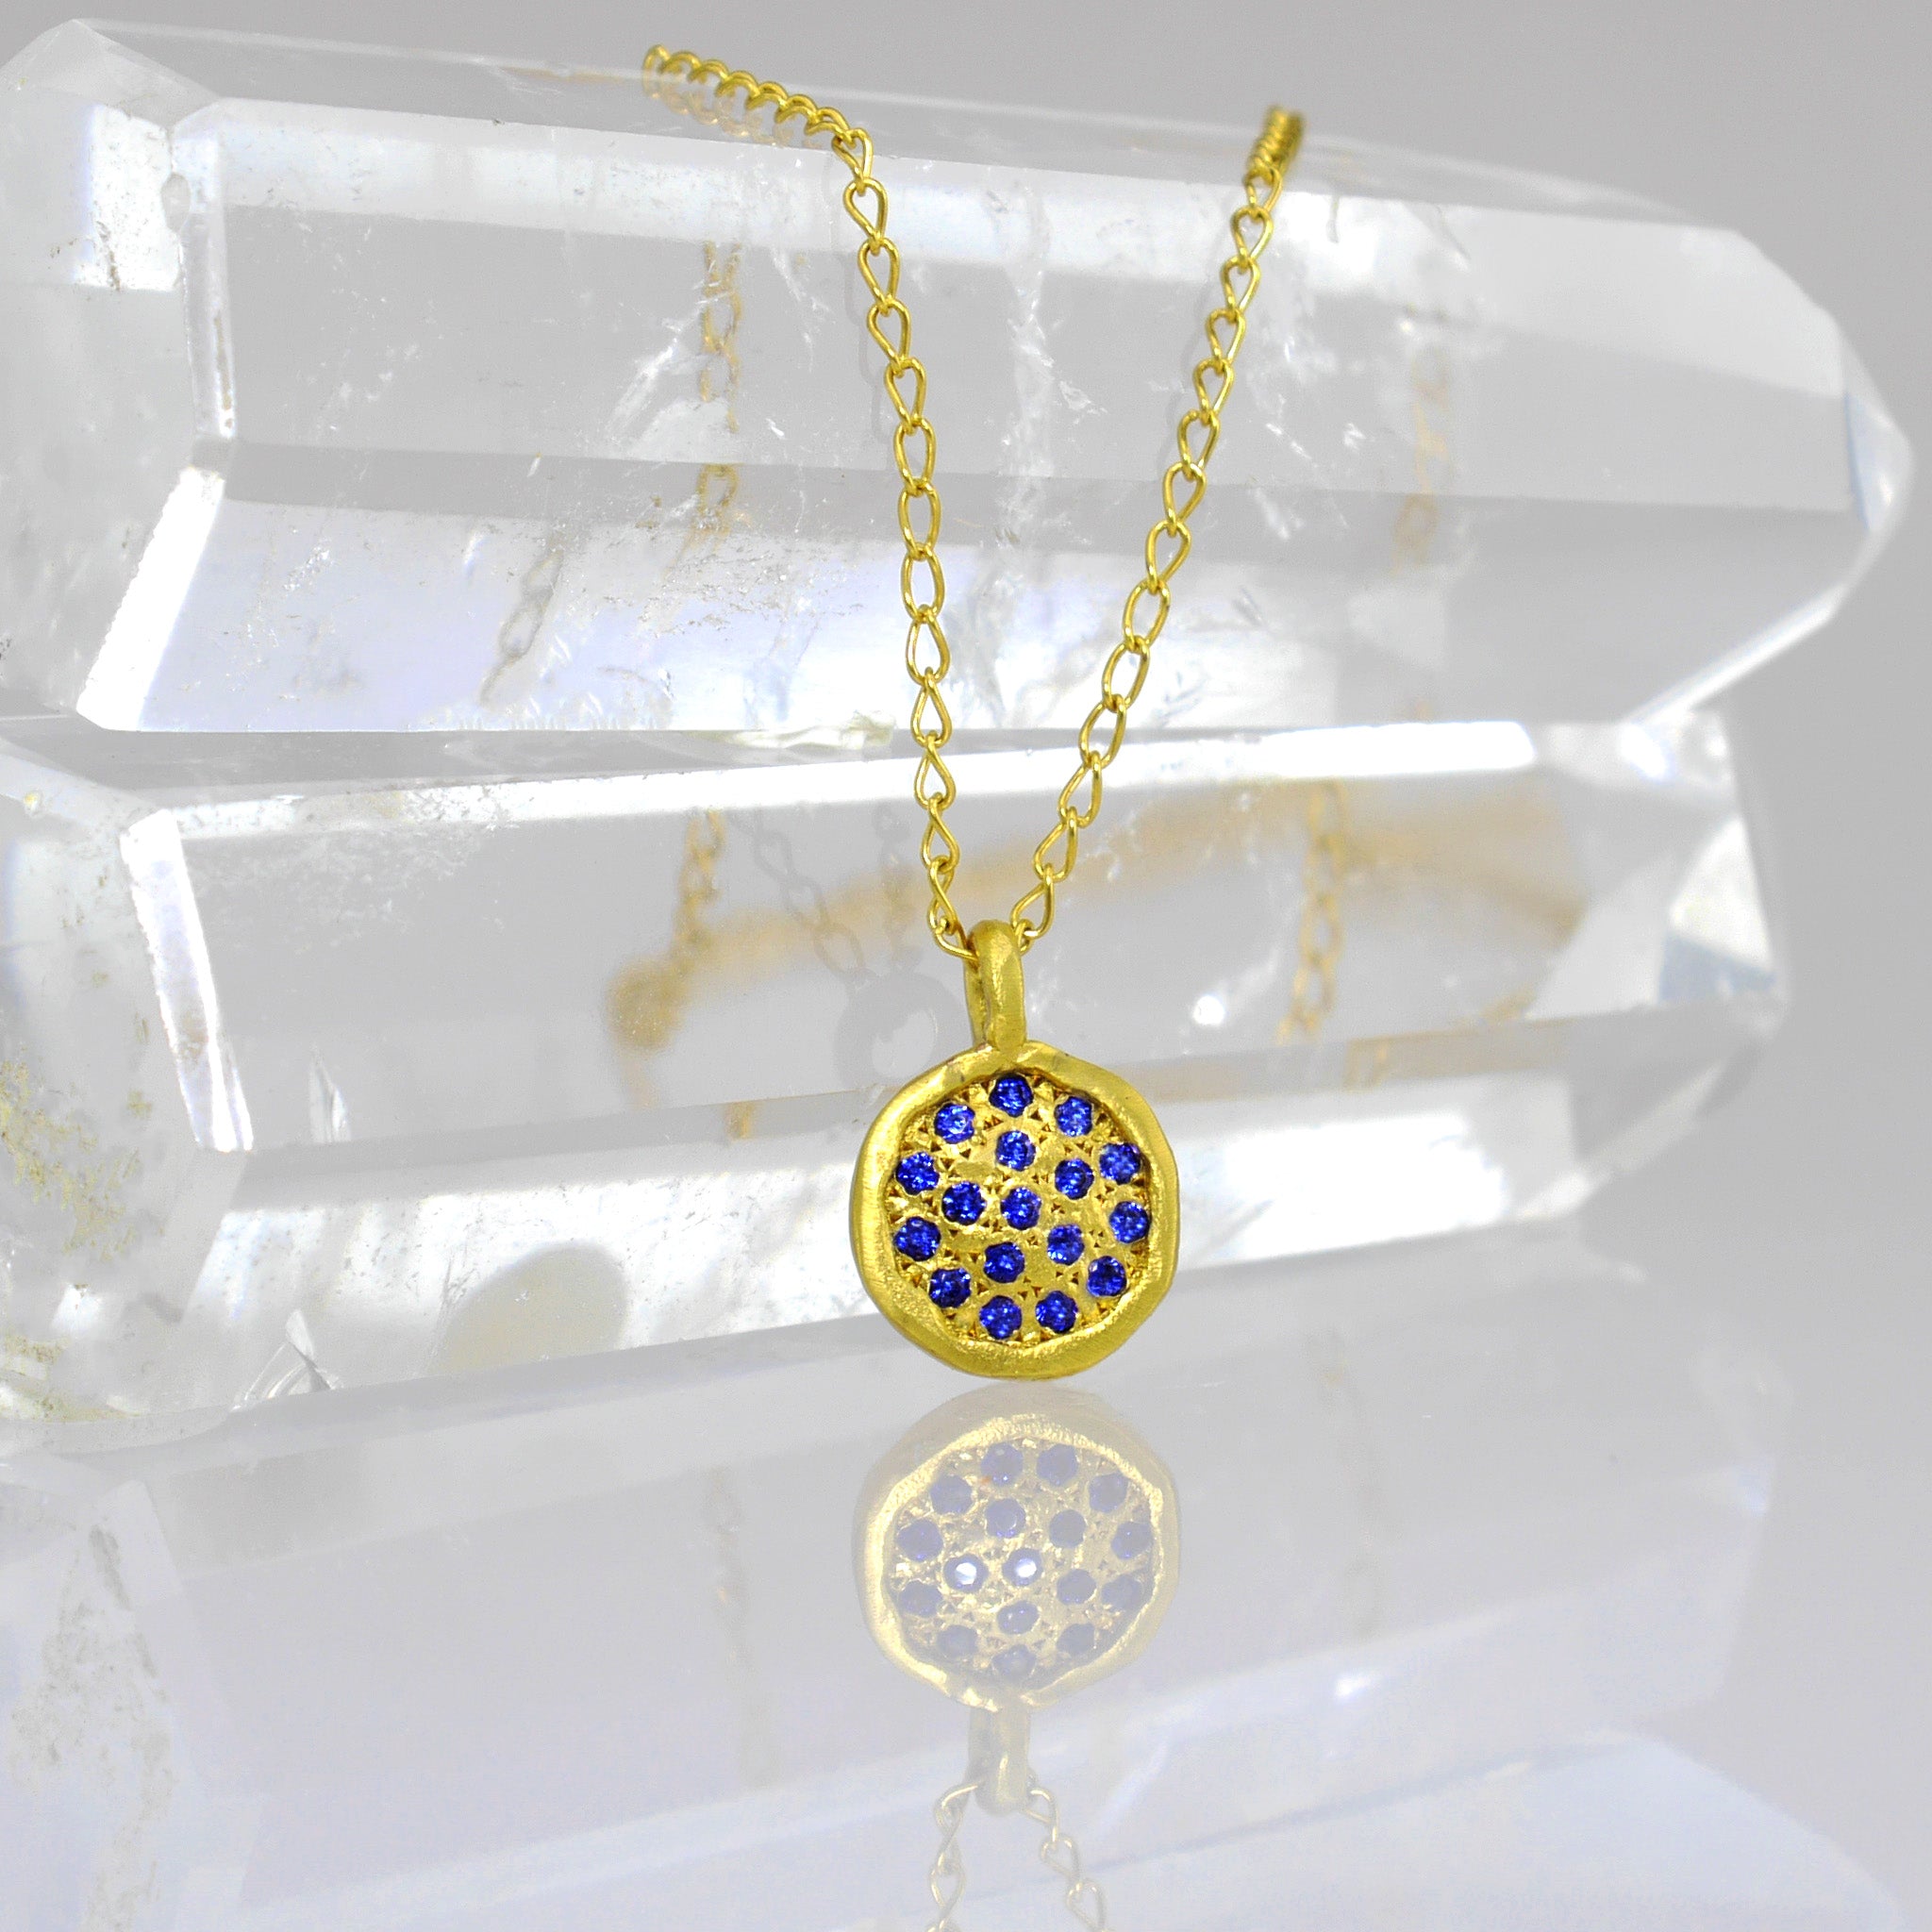 Detail of Starlit gold pendant, exquisitely handmade from Yellow Gold, featuring a small gold plate adorned with scattered Sapphires, evoking visions of a vibrant starry night.